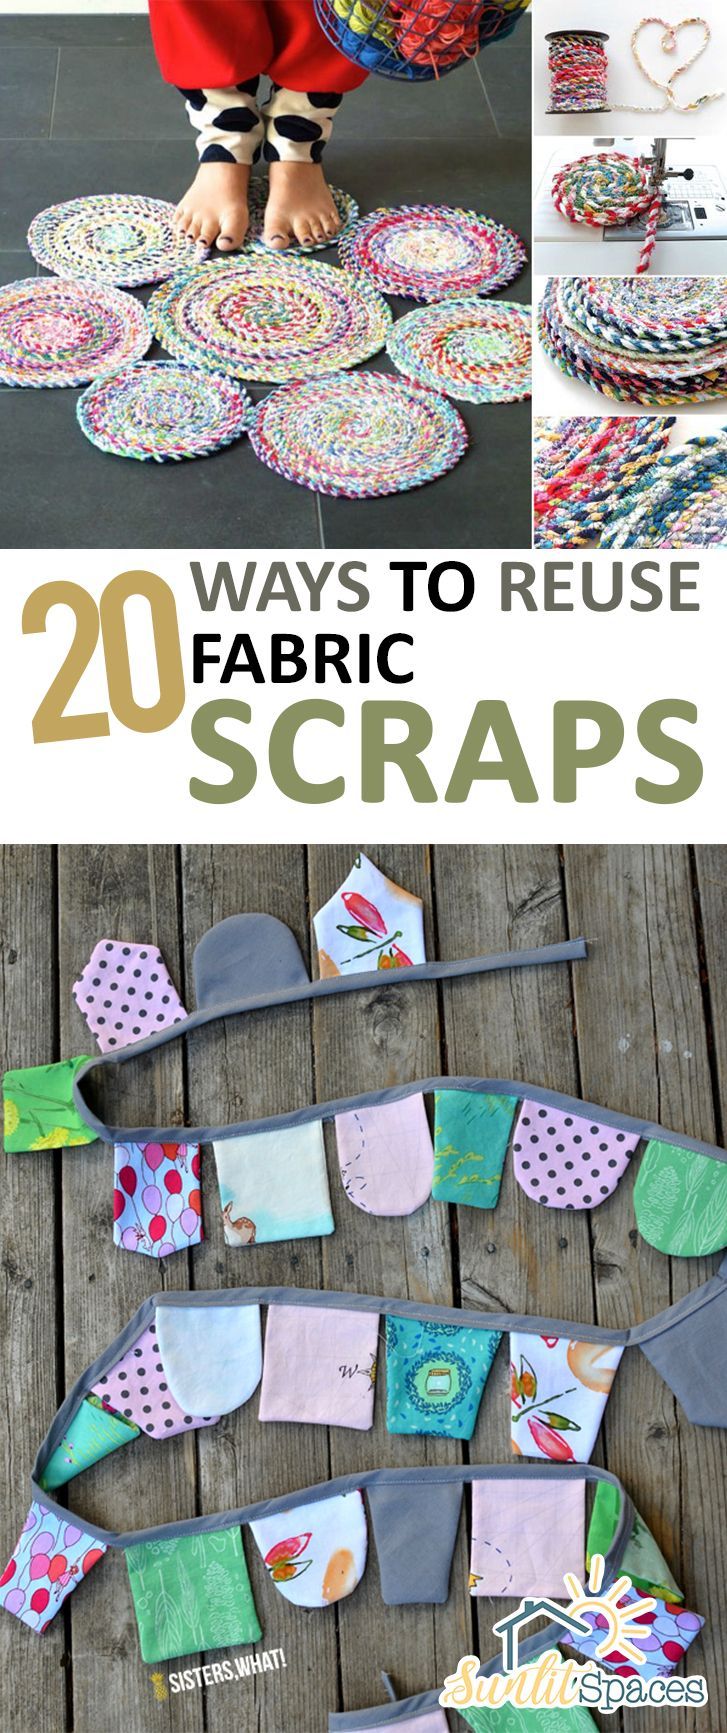 How to Reuse Fabric Scraps, Things to Do With Fabric Scraps, Fabric Scrap Crafts, Easy Sewing Projects, Simple Sewing Projects,